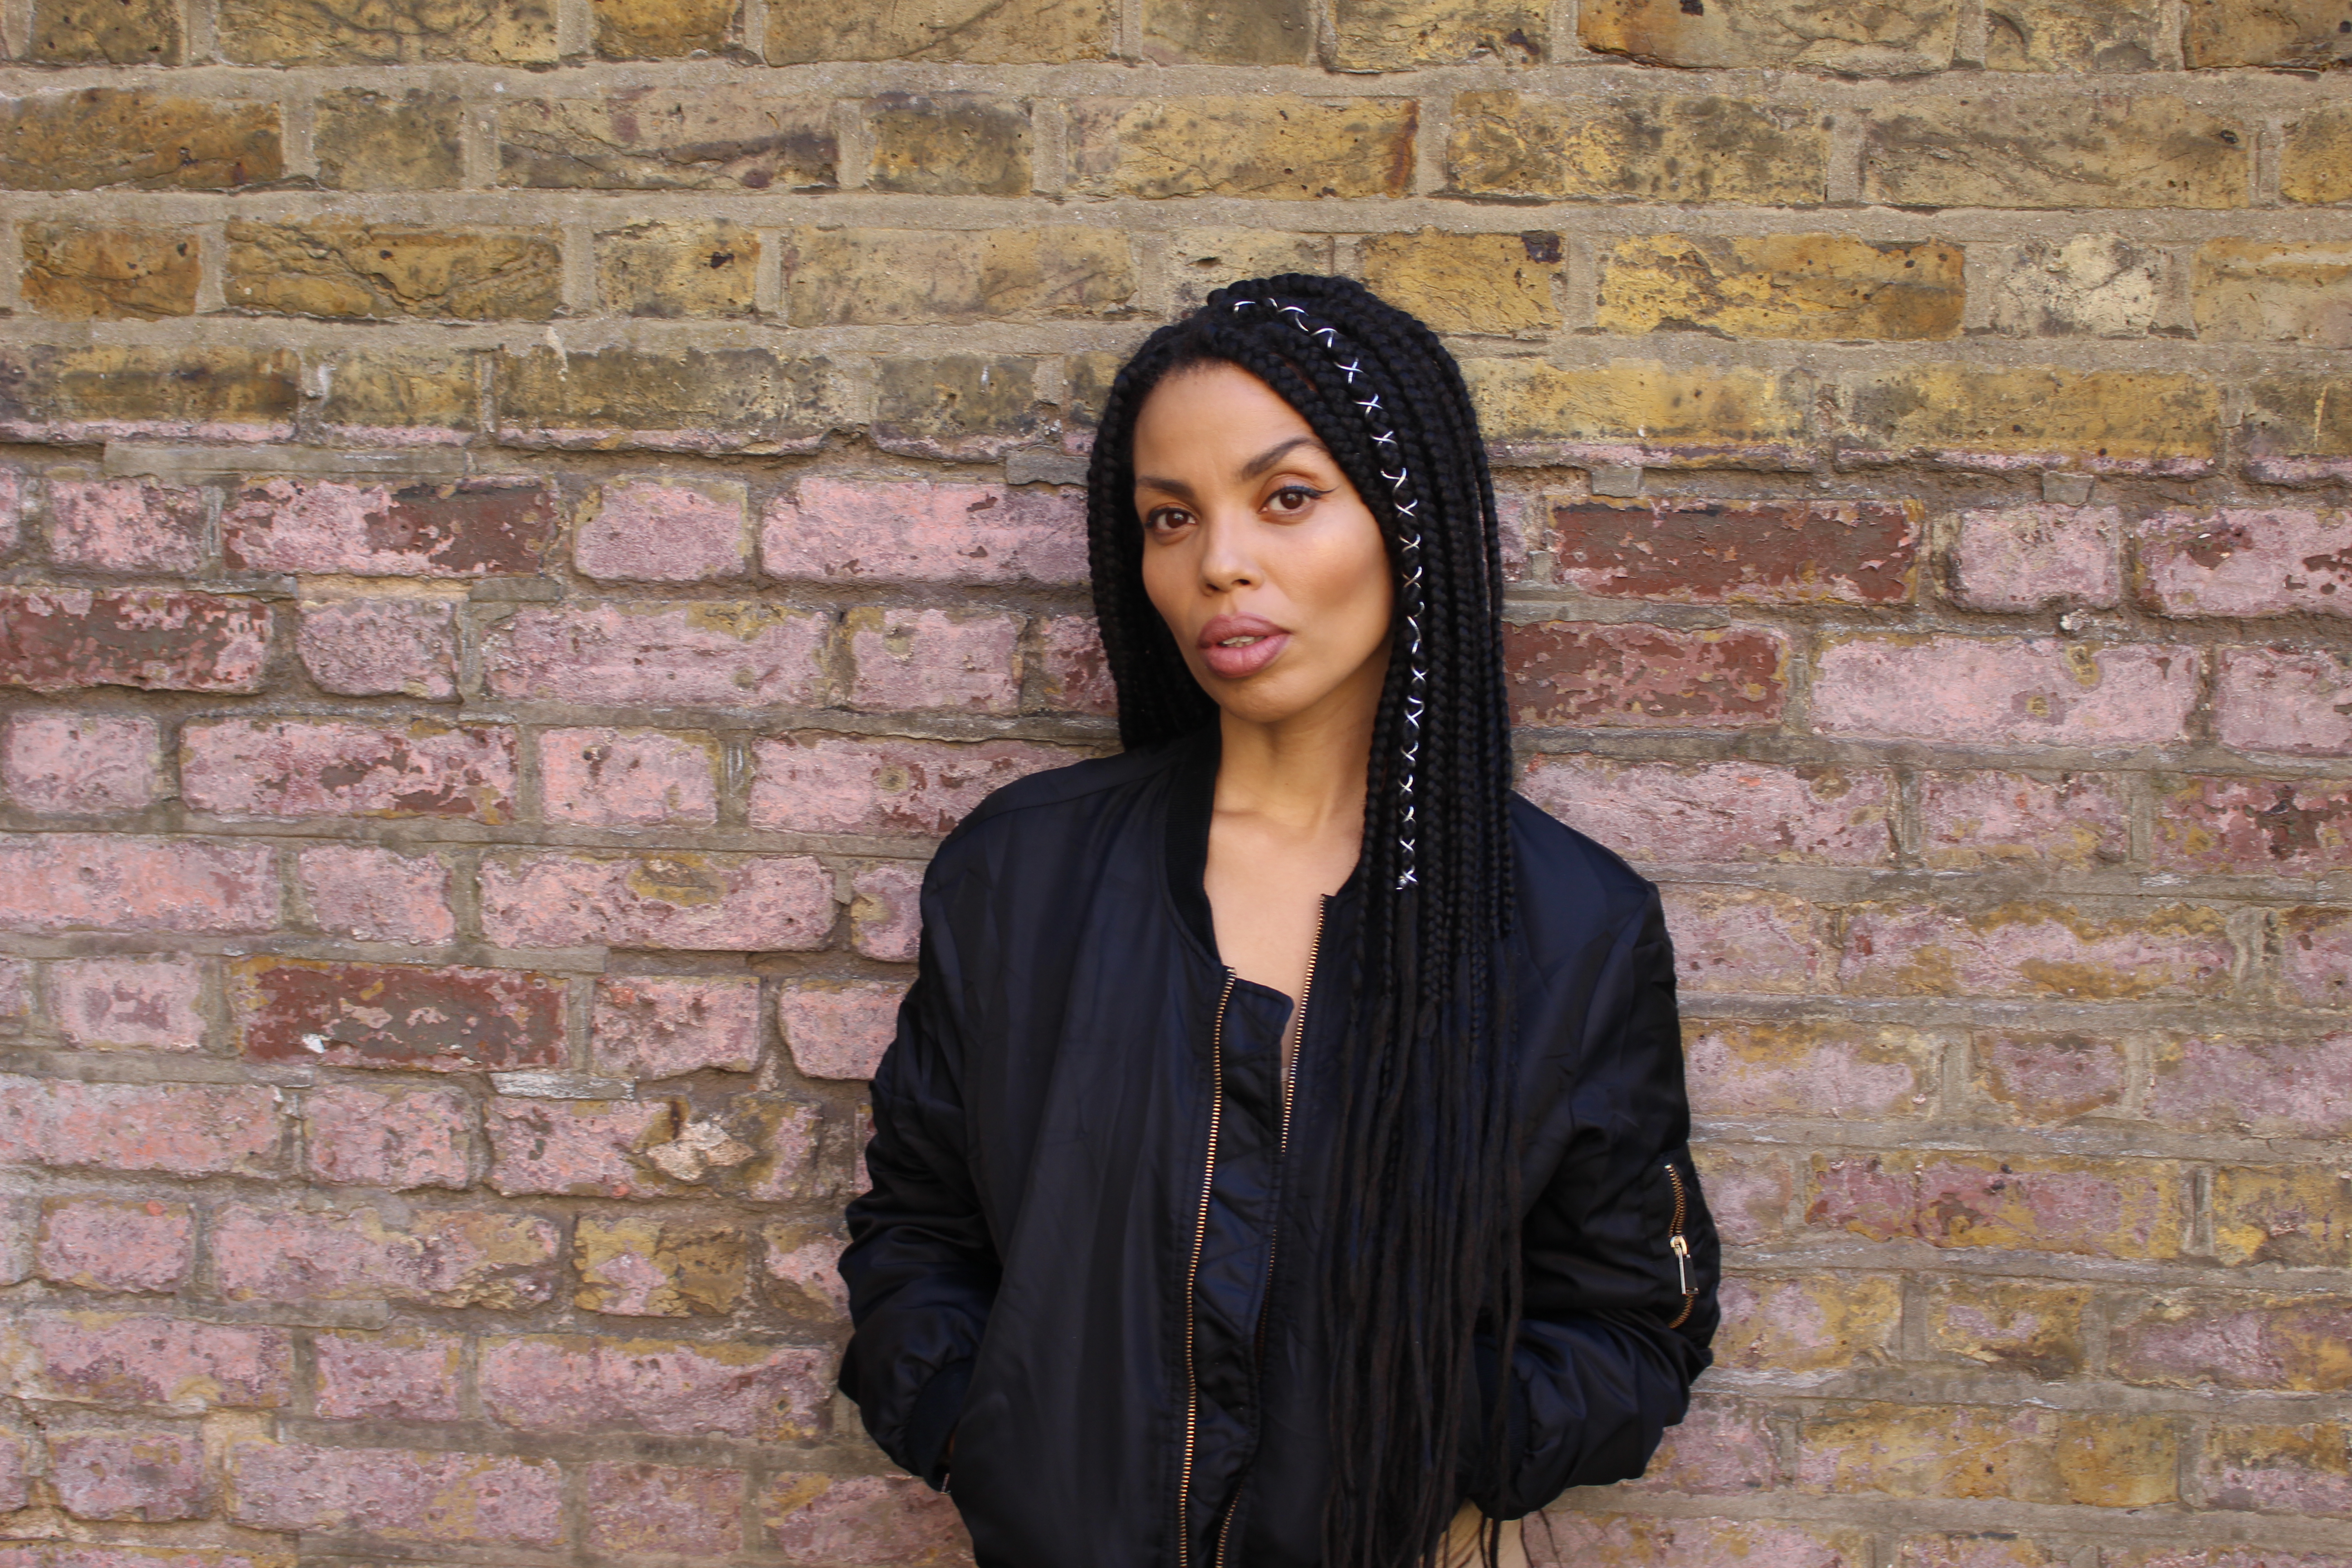 Photo of Emma Dabiri wearing a black top and black jacket, standing in front of a brick wall.